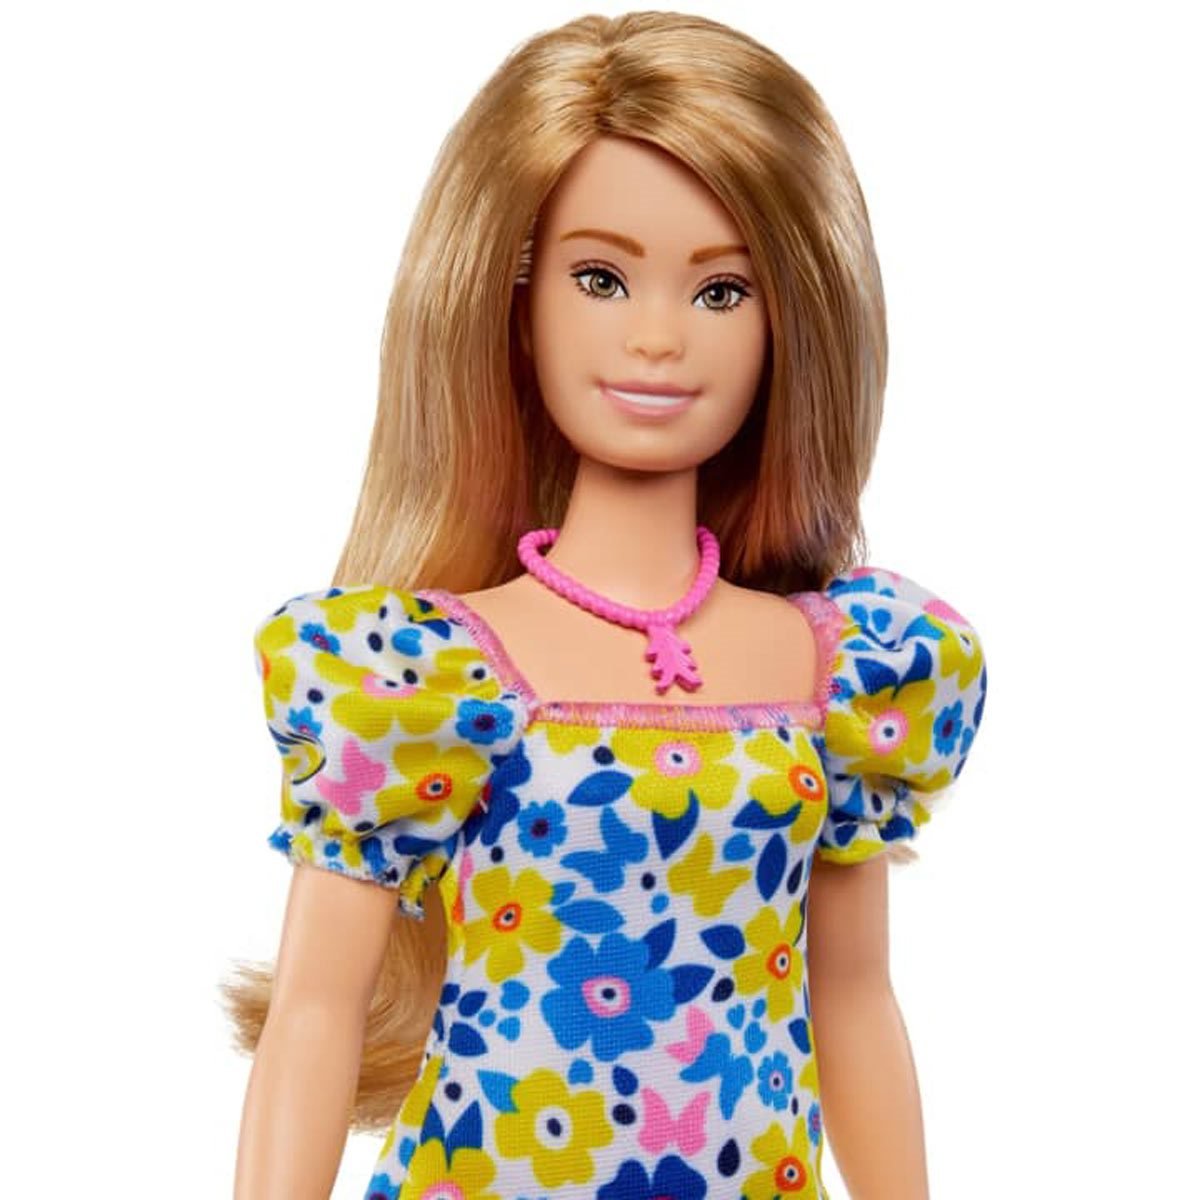 Barbie Doll Clothes Floral Dress with Puffy Sleeves and 2 Accessories